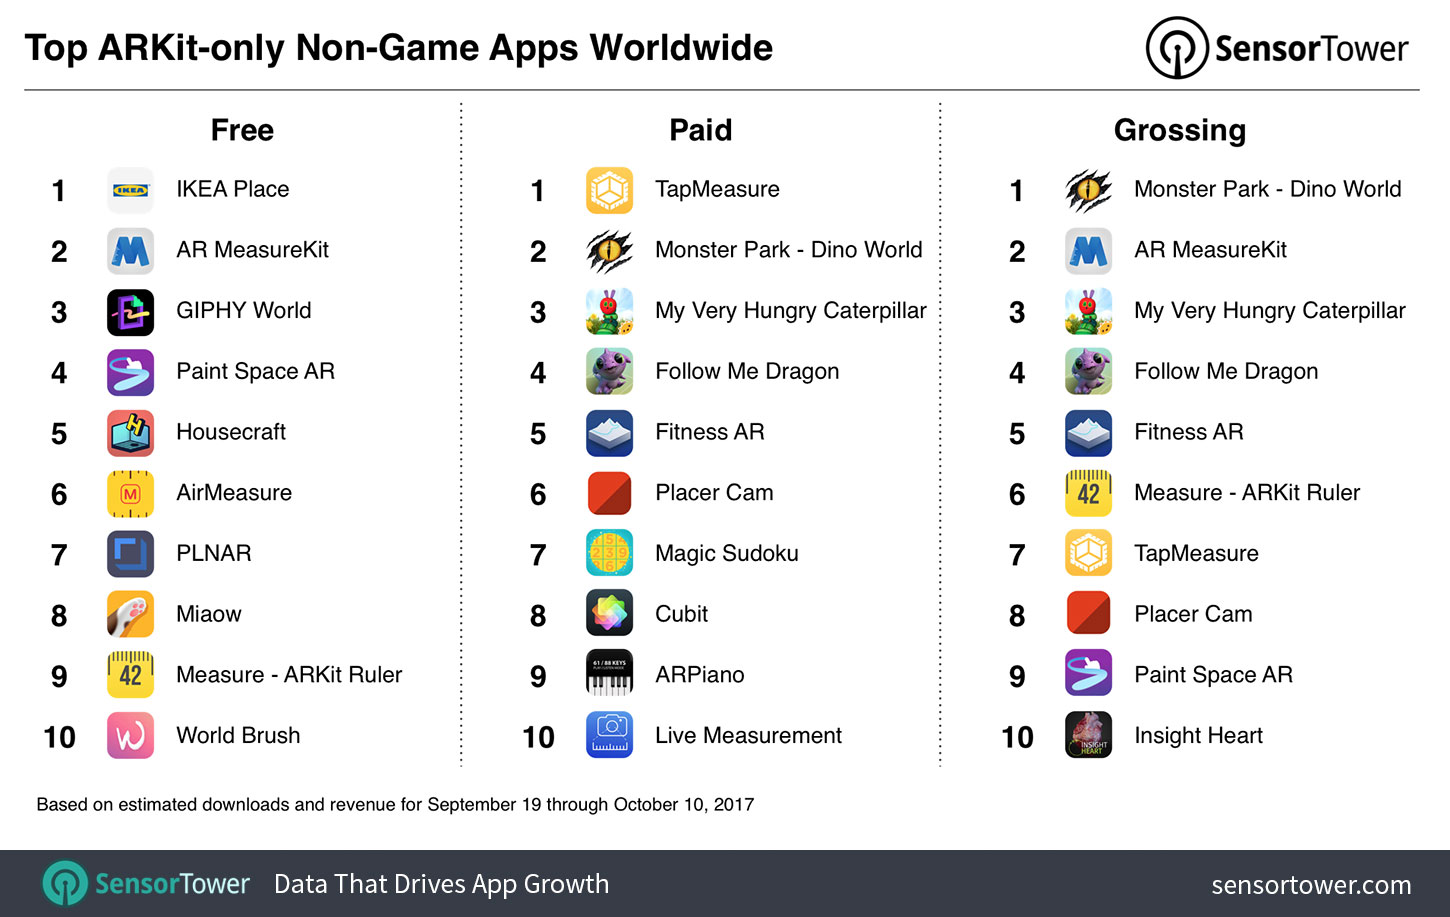 Ranking of top free, paid, and grossing ARKit non-game apps for September 19 to October 10, 2017